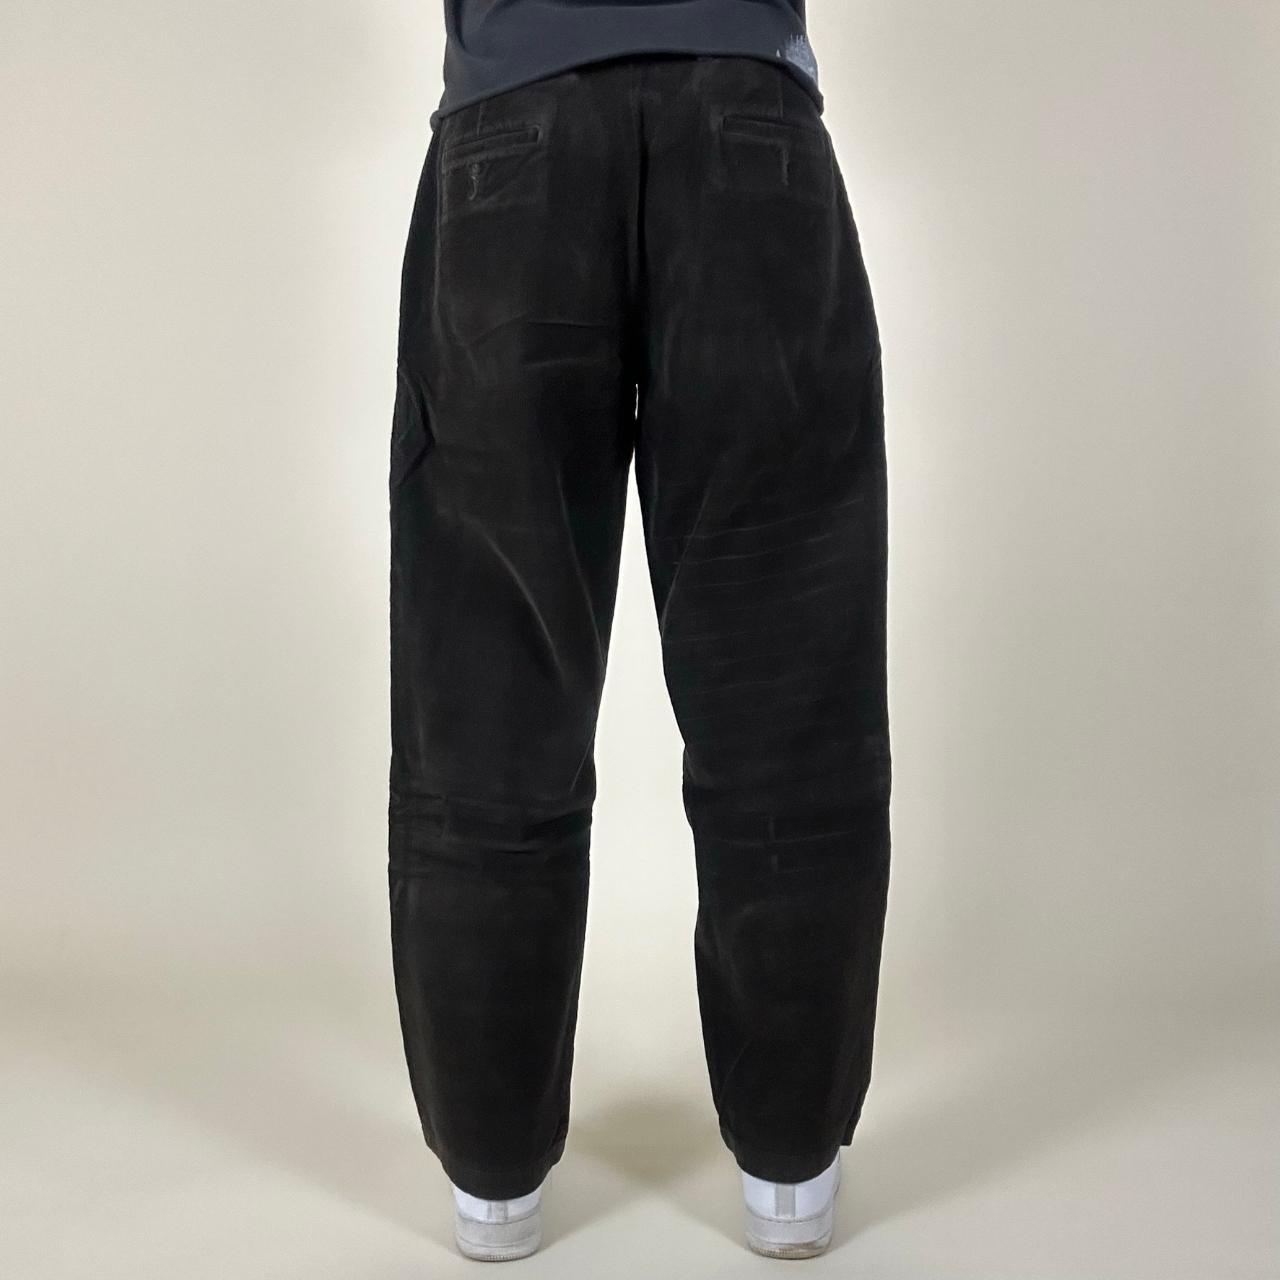 Dockers Men's Grey and Black Trousers (3)